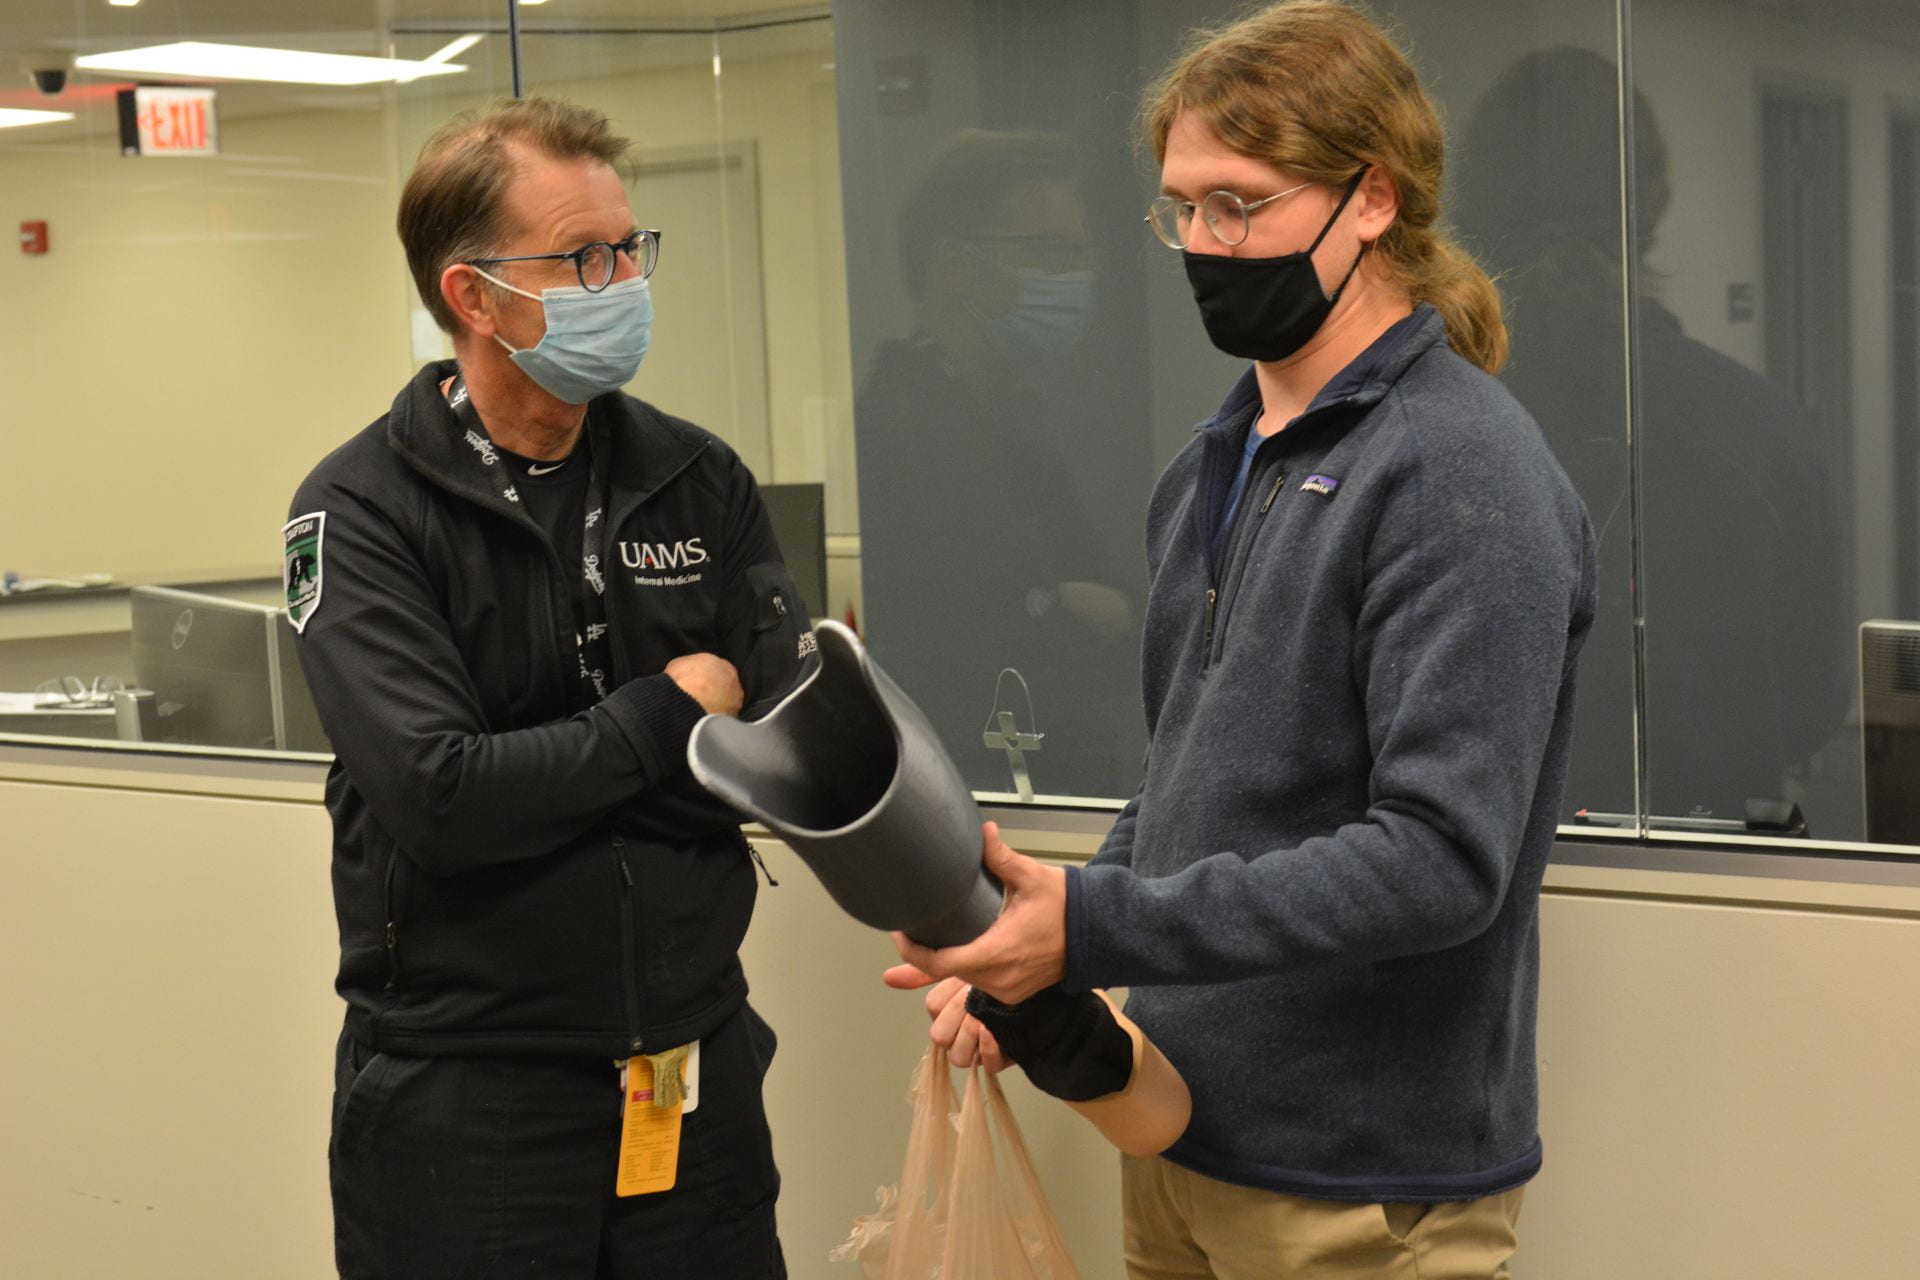 Dr. Tom Schulz (left), director of the UAMS North Street Marshallese Clinic, speaks with U of A student Kyle Potts.